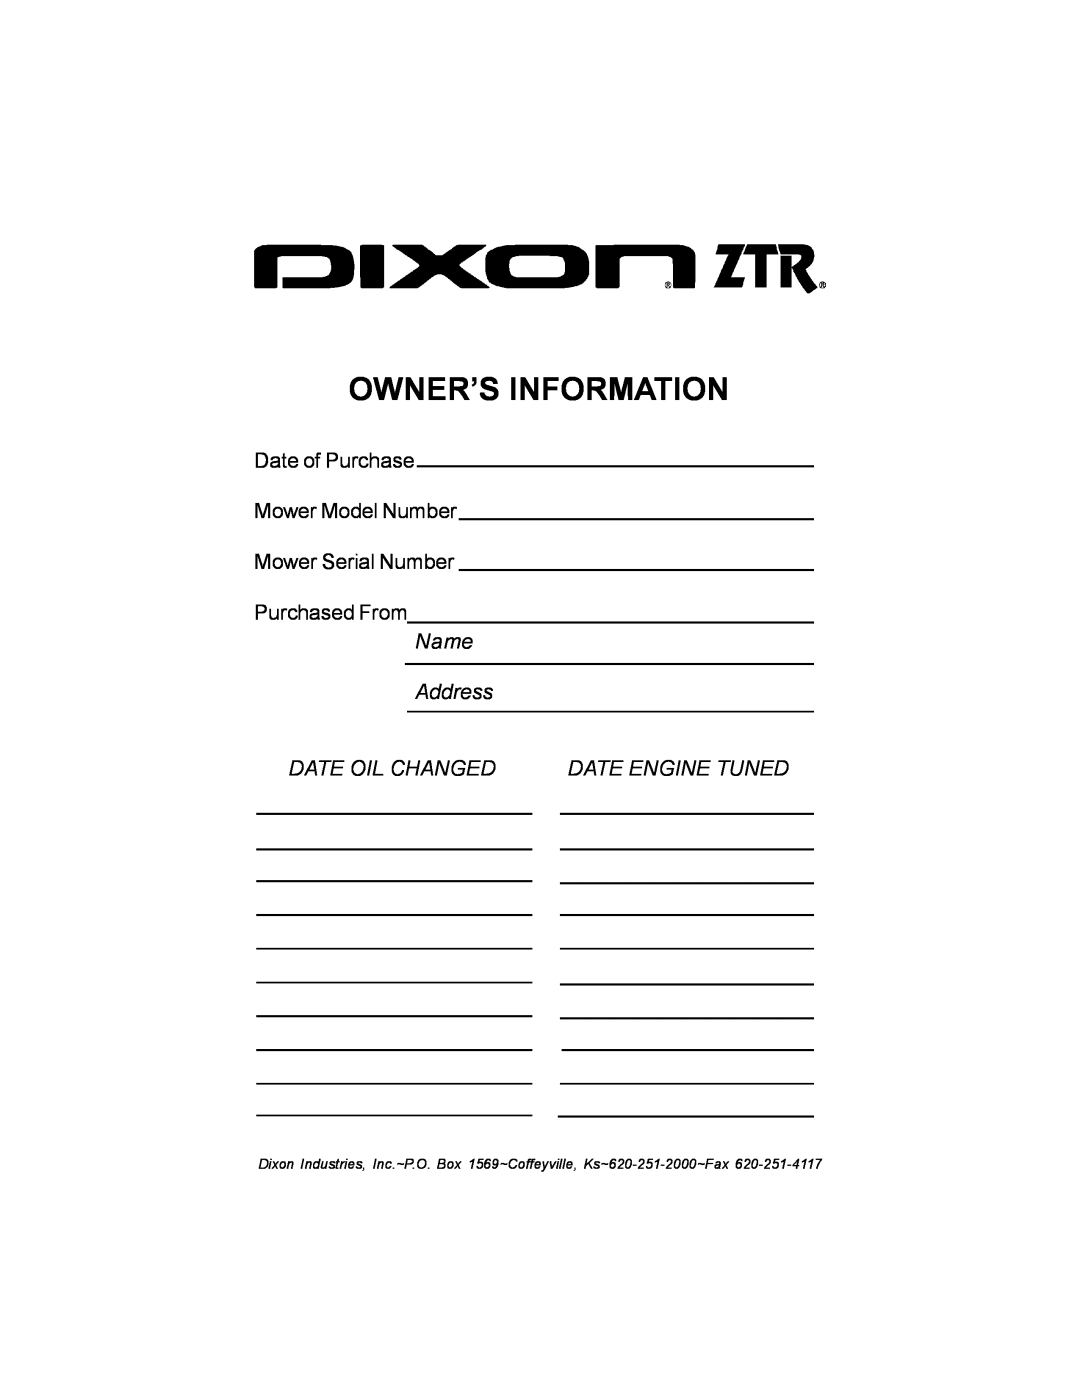 Dixon 18626-106 Owner’S Information, Date of Purchase Mower Model Number Mower Serial Number, Purchased From, Name Address 